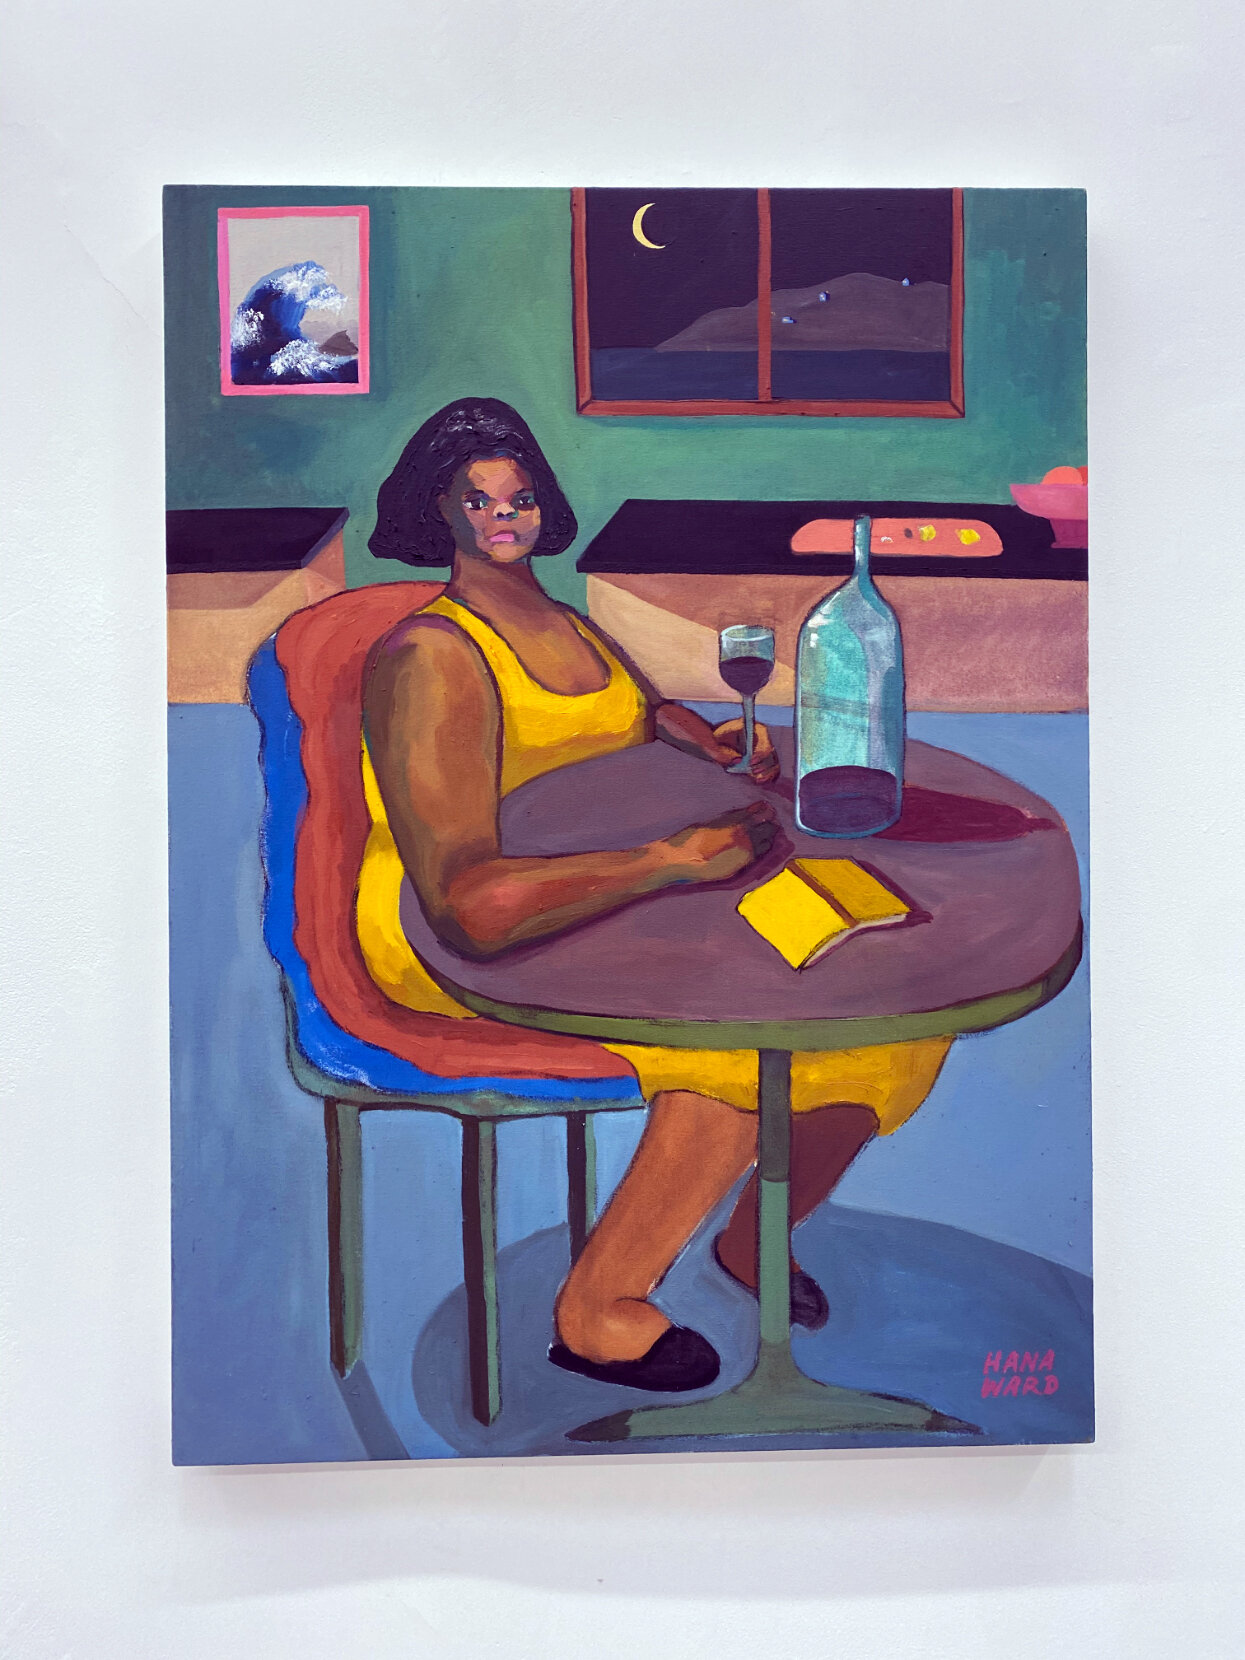  Hana Ward  that drinking-wine-kind-of-thinking , 2021 oil on canvas 37 x 27 in 